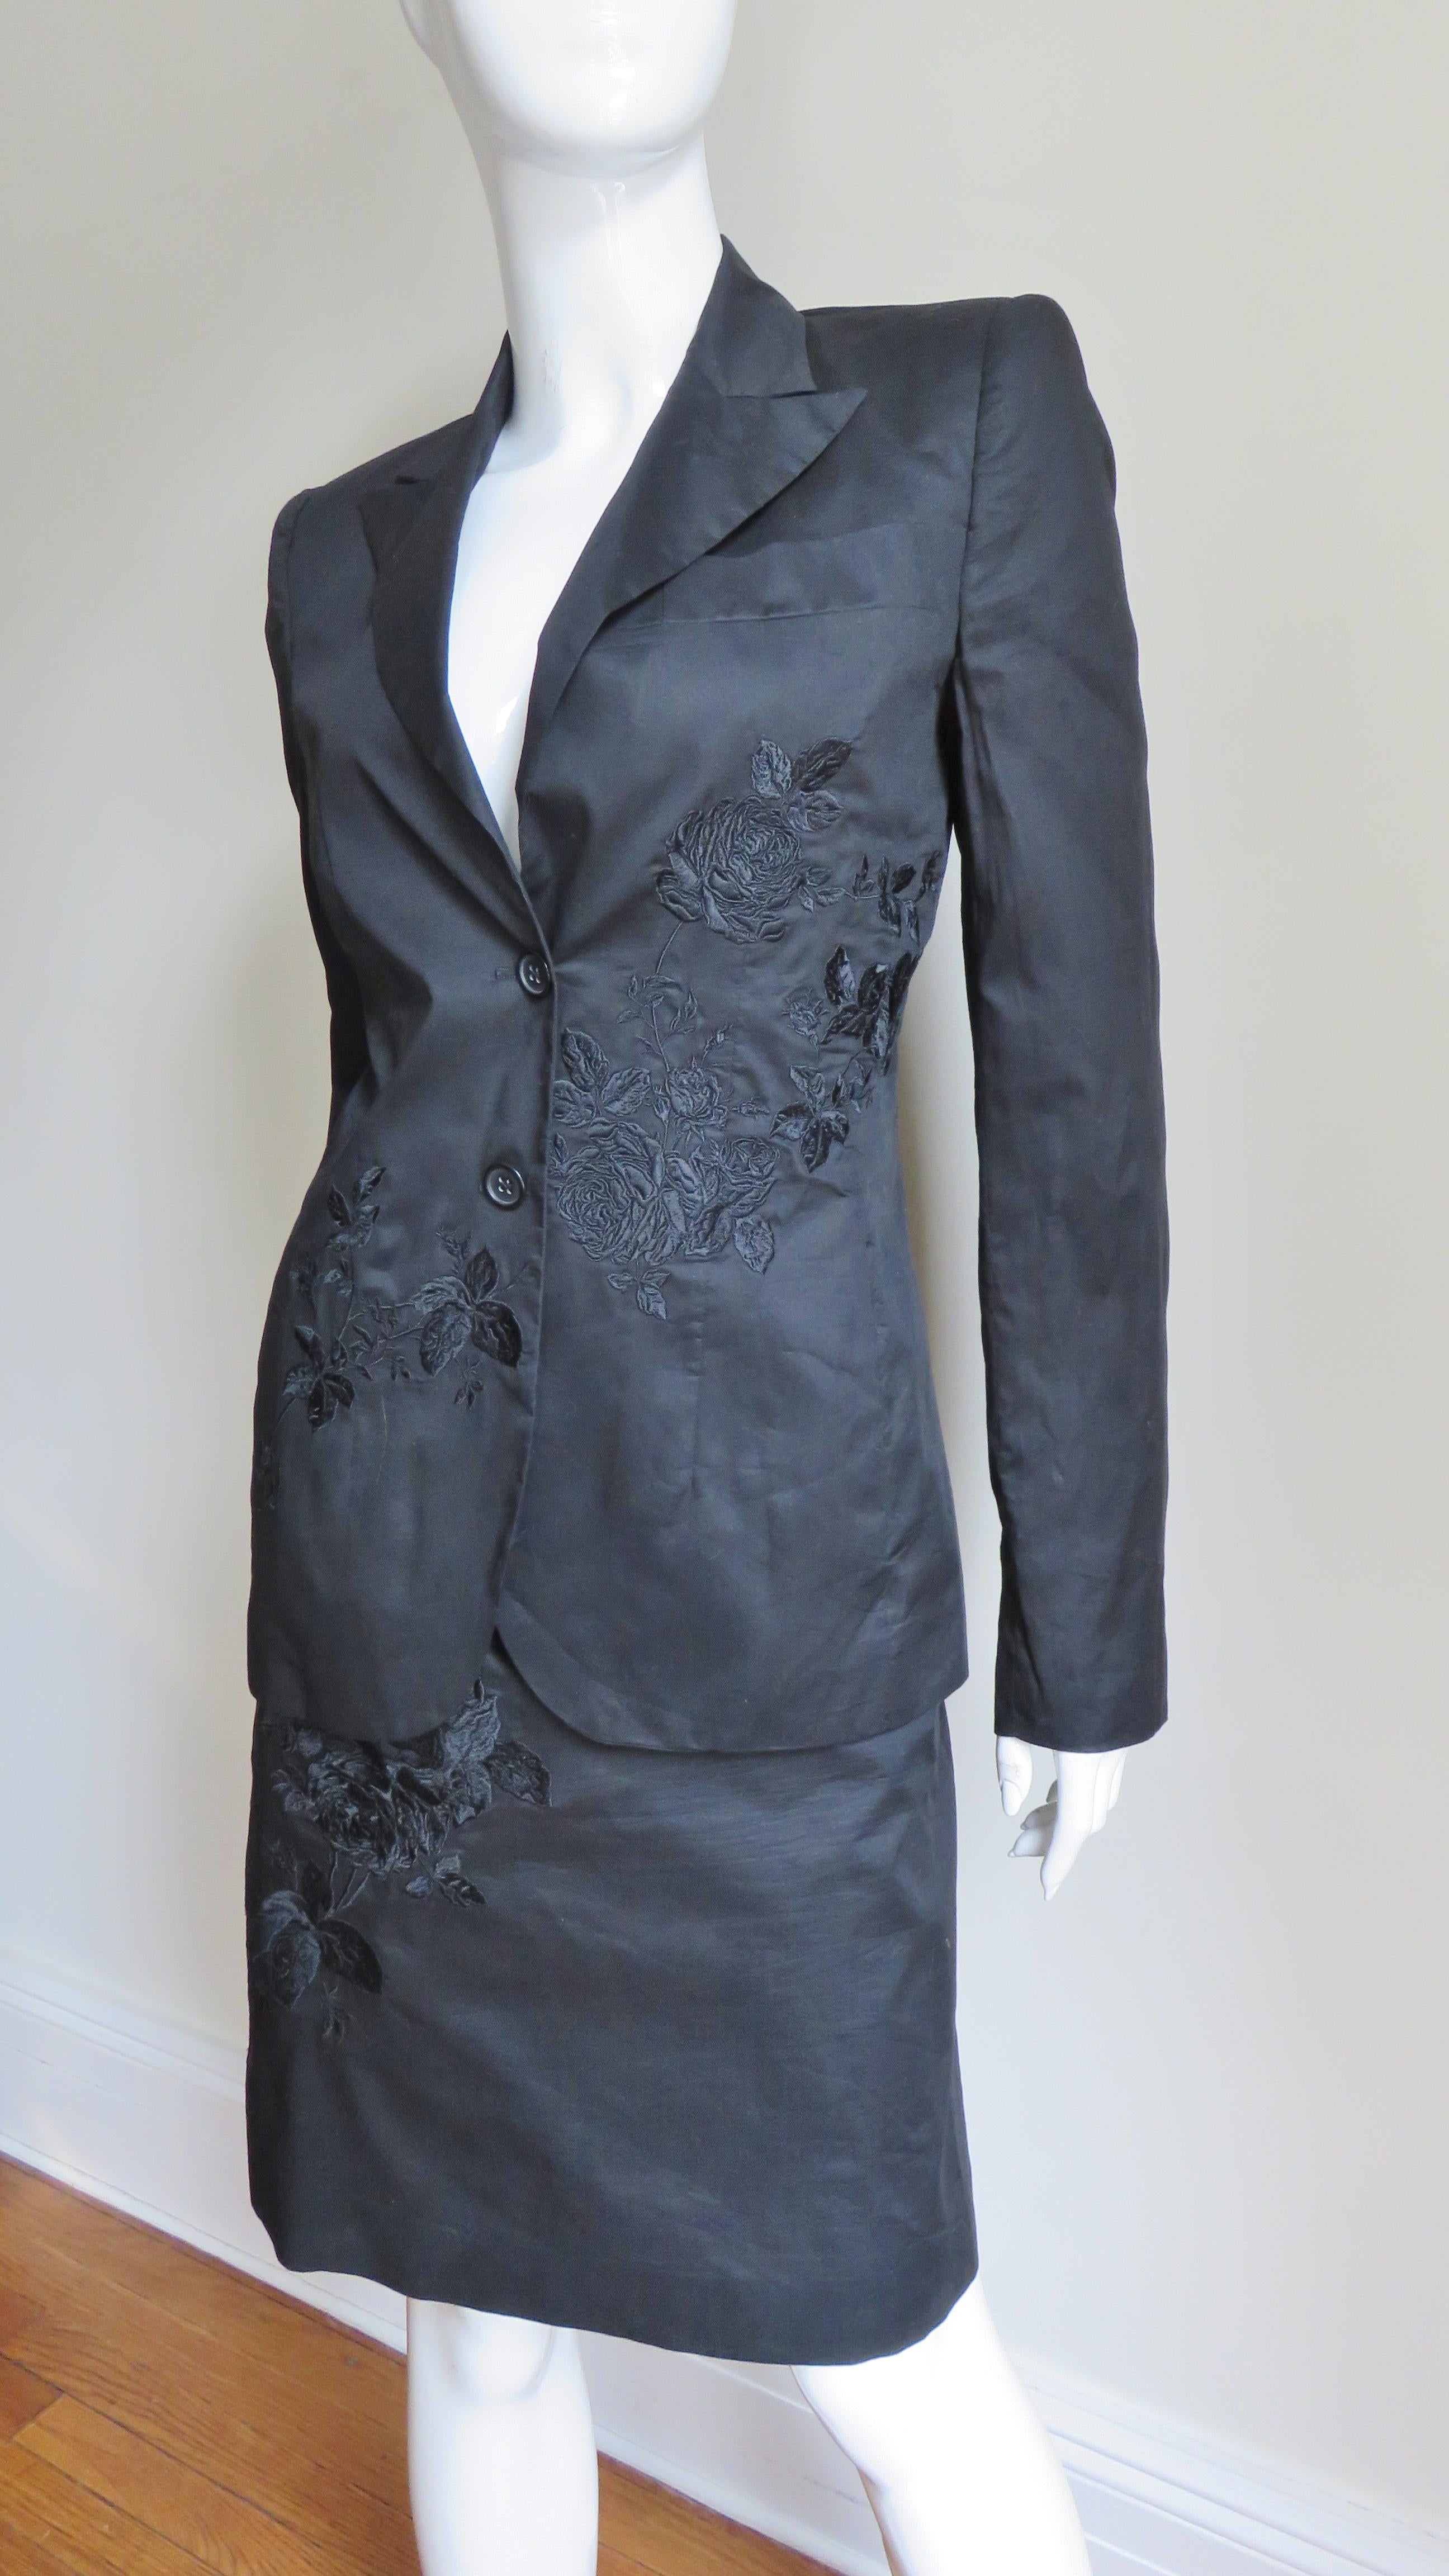 Alexander McQueen New S/S 2002 Three Piece Skirt Suit with Intricate Embroidery In Excellent Condition For Sale In Water Mill, NY